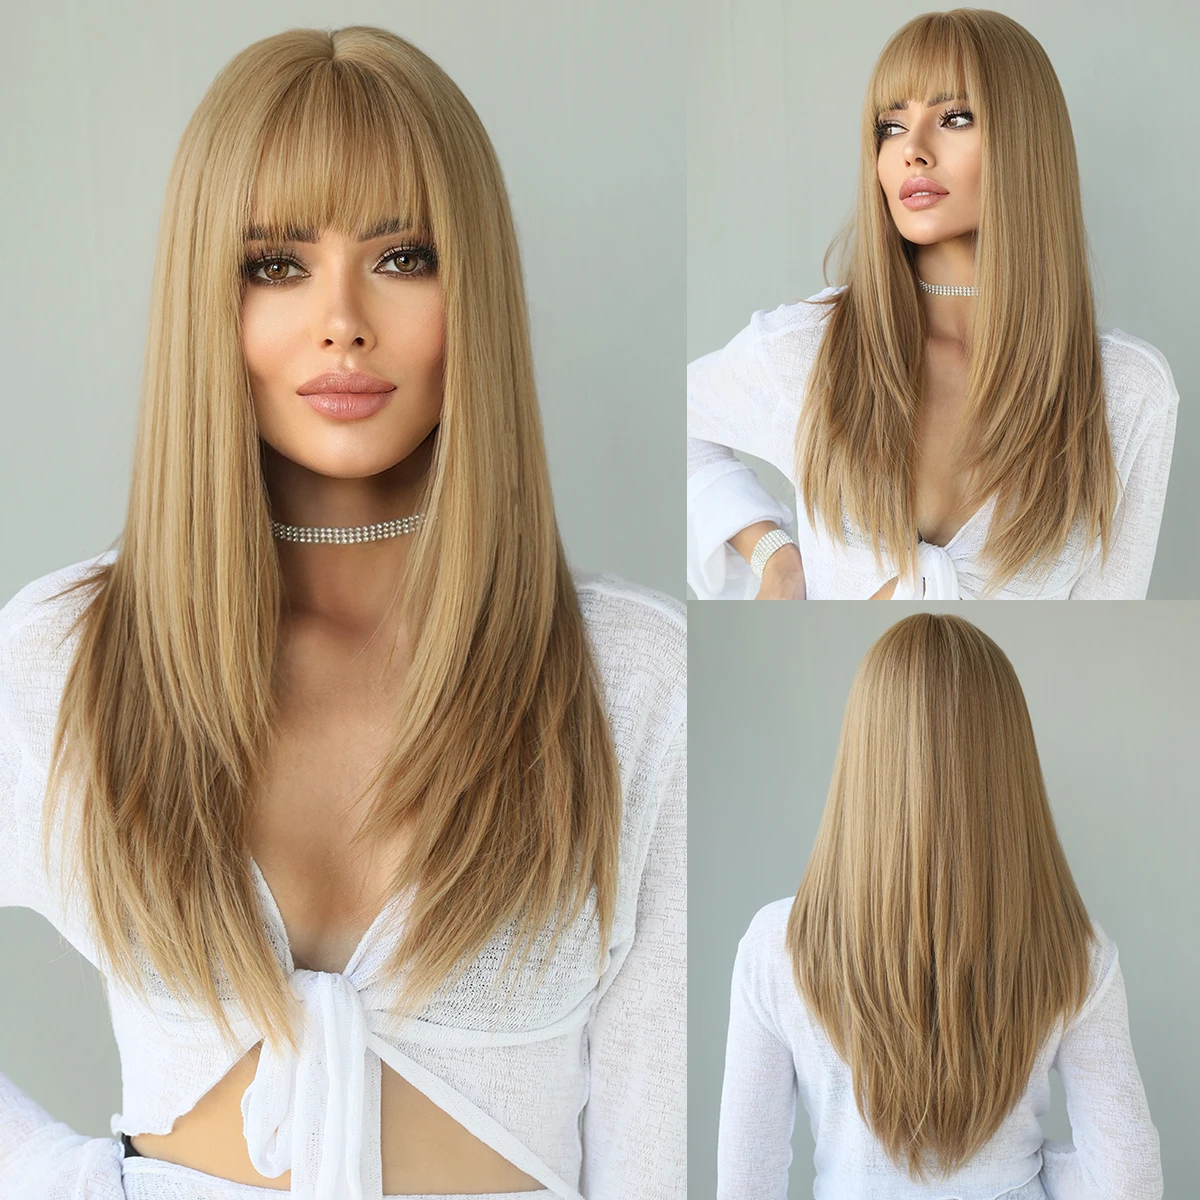 NAMM Synthetic Blonde Wigs with Bangs Long Straight Hair Wigs for Women Cosplay Wig Party Heat Resistant Hair Natural Female Wig synthetic blonde wig with bangs short none lace front wig for women middle parting daily cosplay party heat resistant bang wig